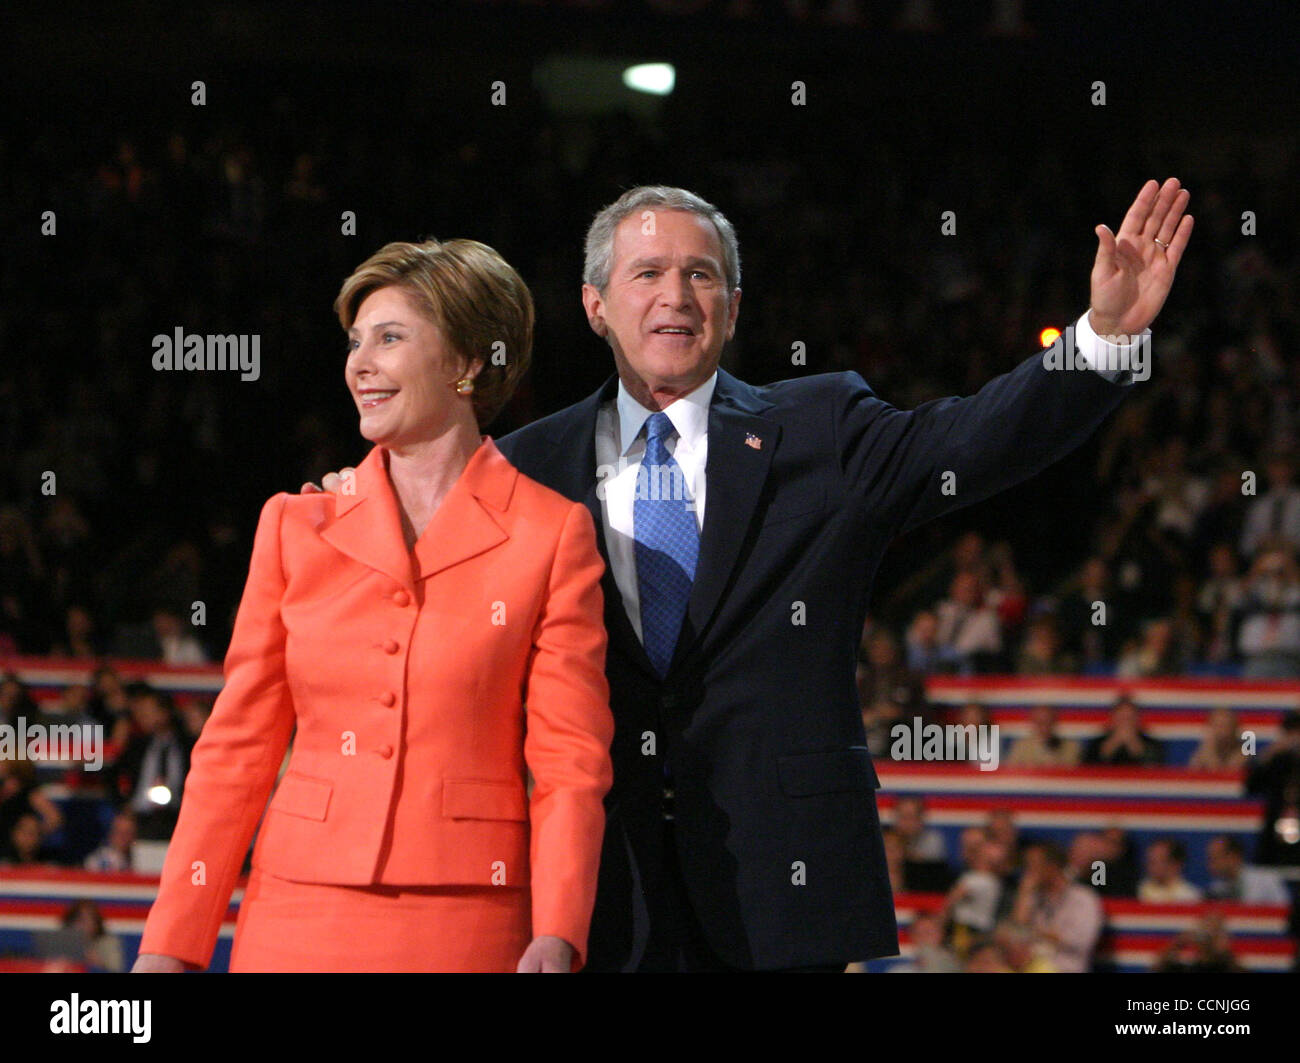 Nov 03, 2004; New York, NY, USA; Republican President GEORGE W. BUSH  re-elected for second term as 43rd President of the United States, winning the 2004 Presidential Election. Pictured: (FILE PHOTO) Sept 02, 2004; New York, NY, USA; First Lady LAURA BUSH & President GEORGE W. BUSH at day four of th Stock Photo